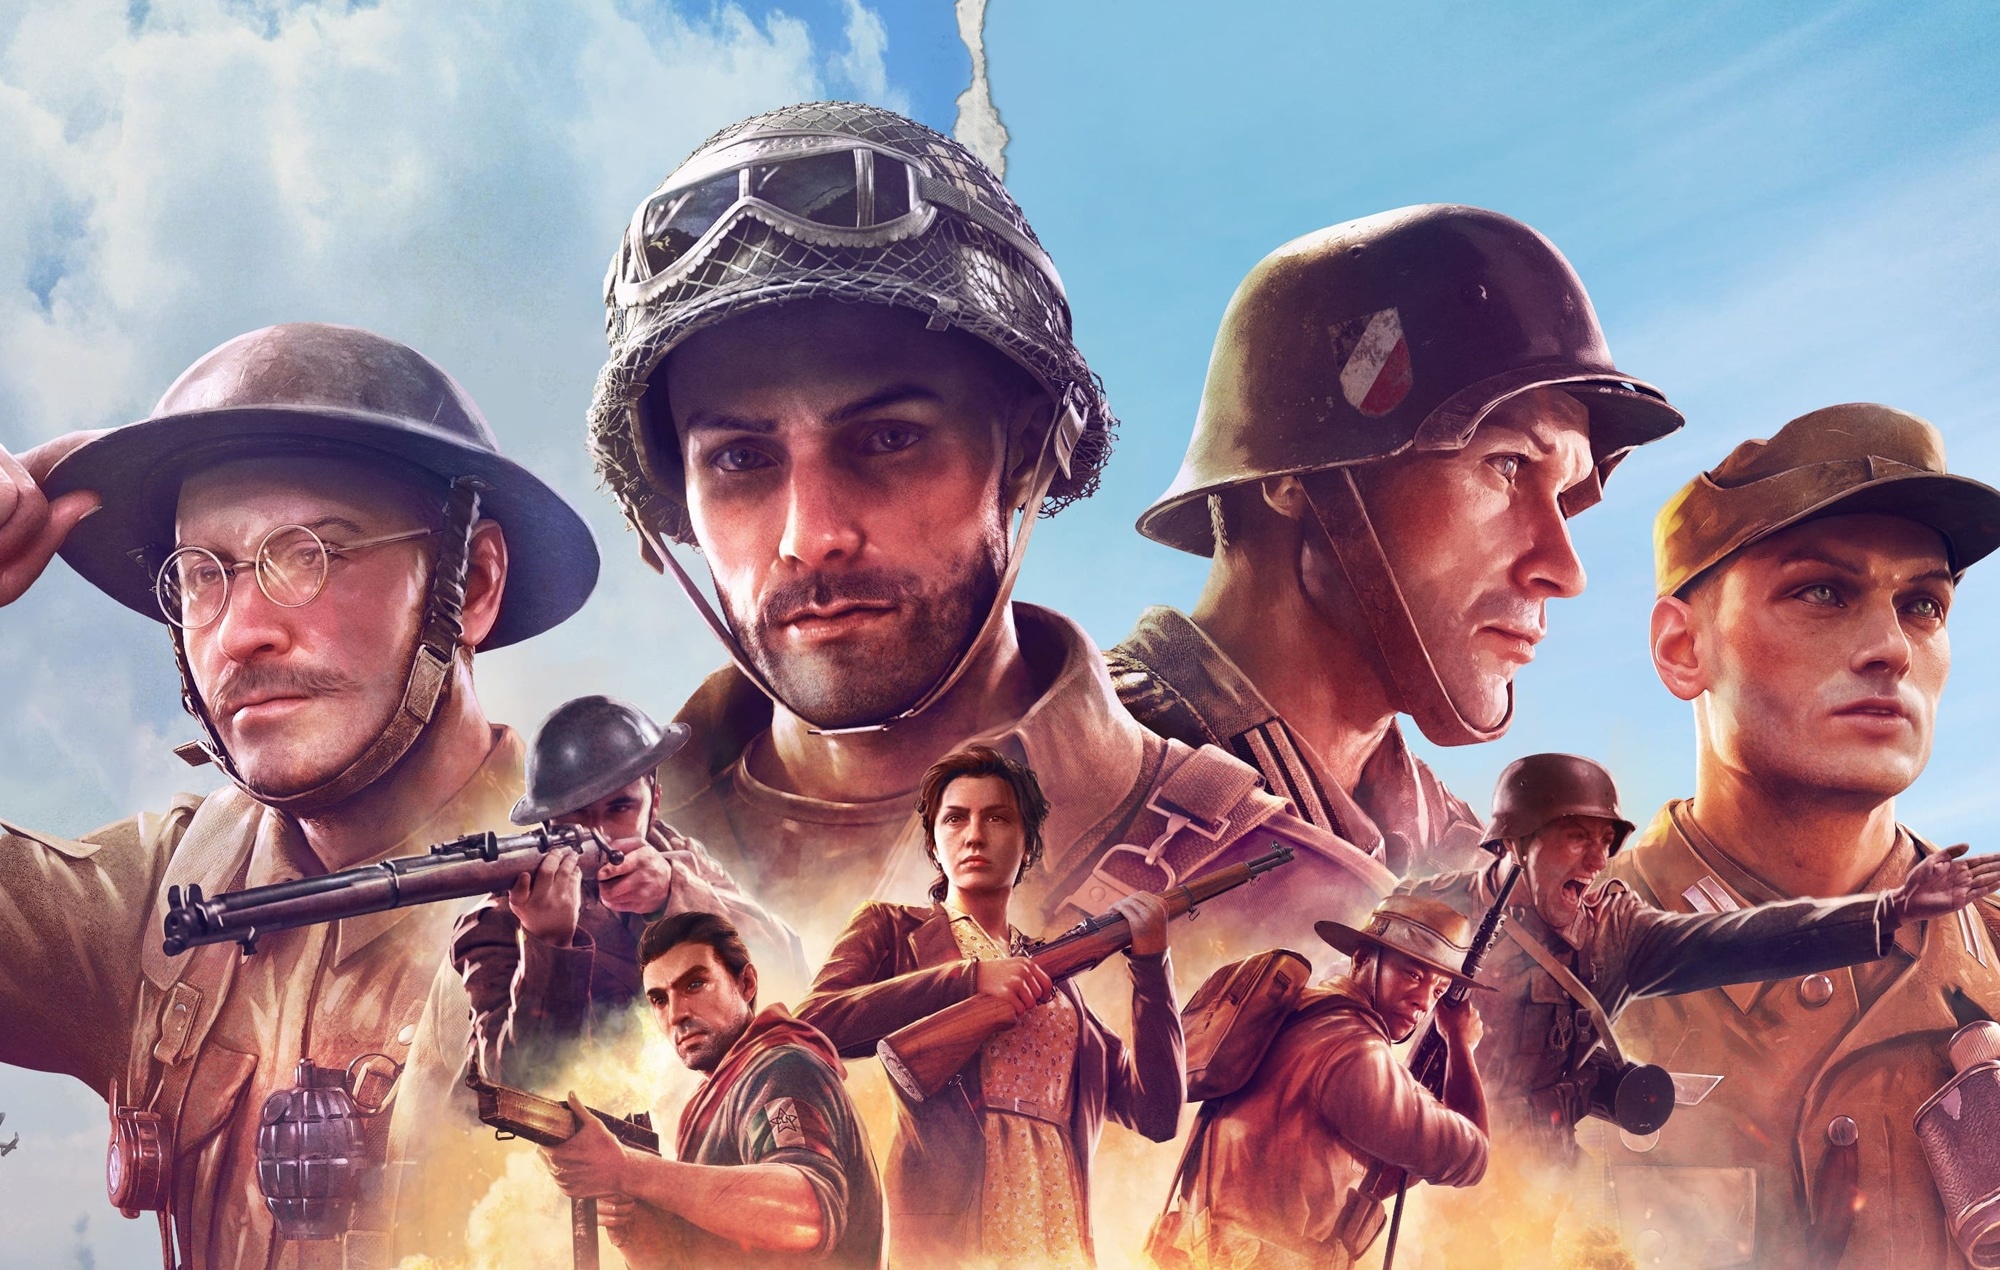 Company of Heroes 3: A real-time strategy video game, third in a series. 2000x1270 HD Background.